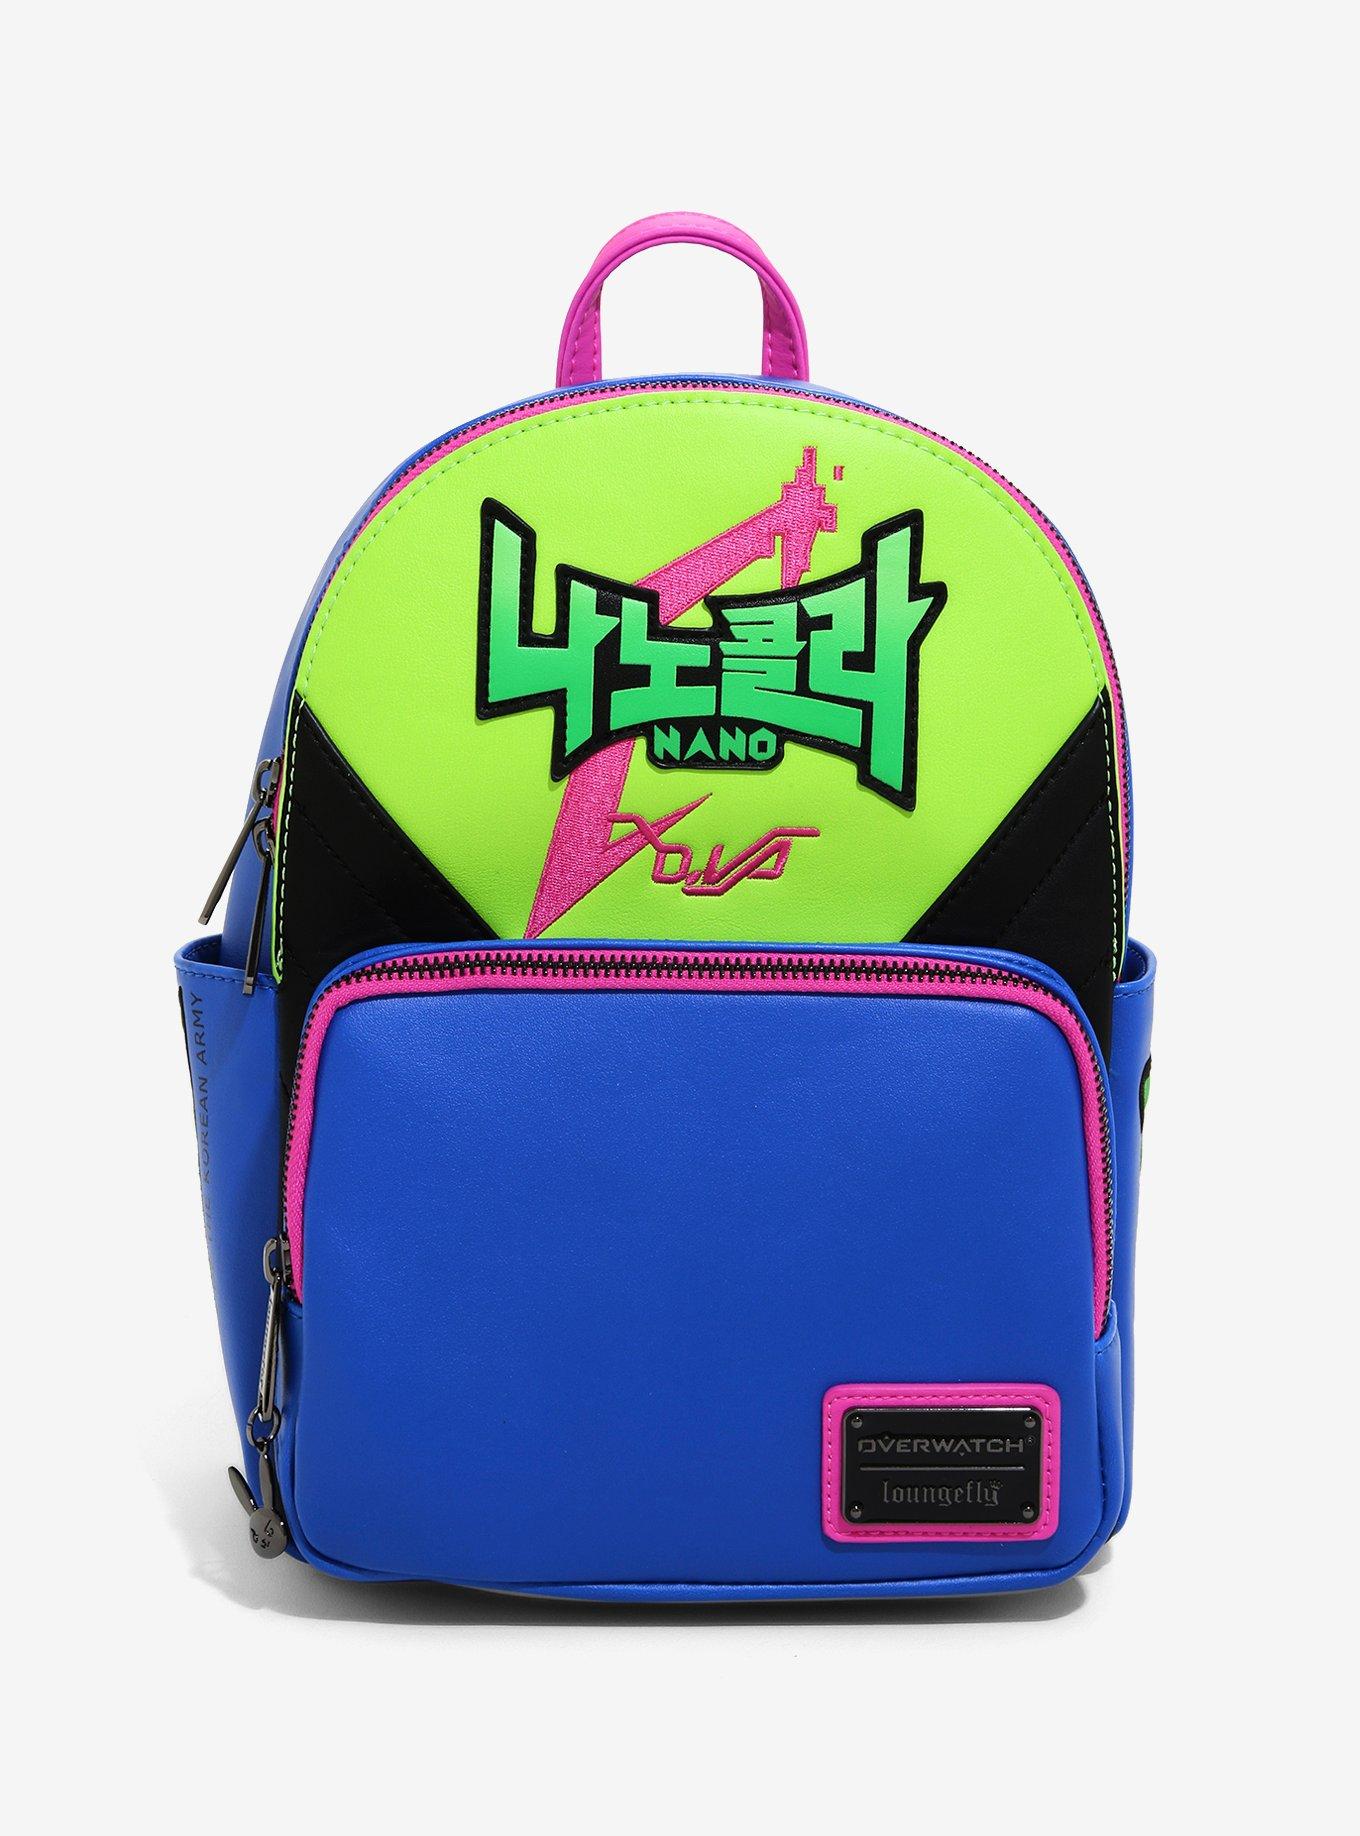 Looking for Overwatch x Loungefly Bags + Accessories! : r/Loungefly